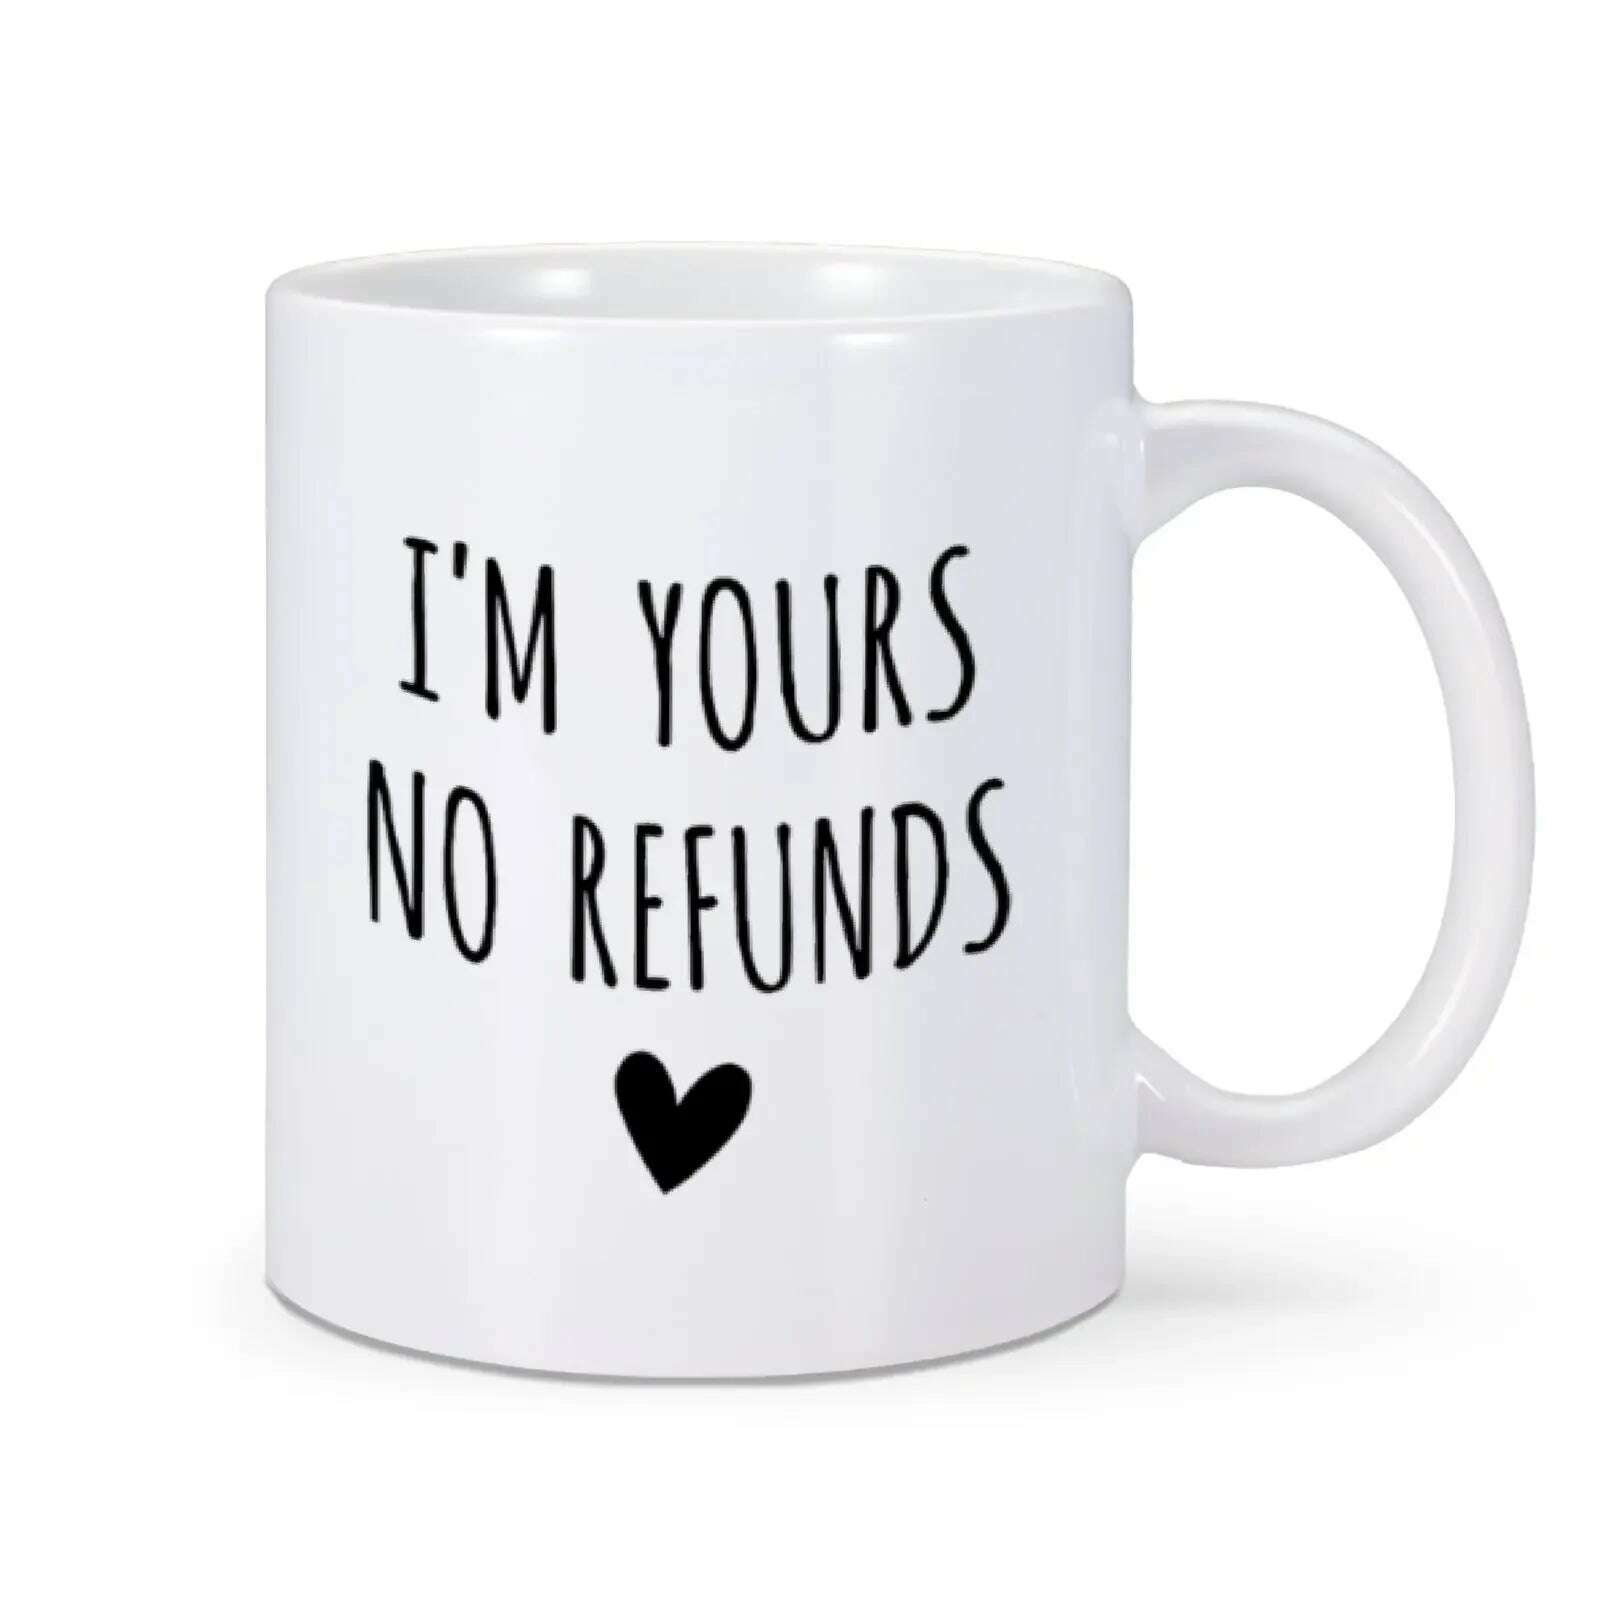 KIMLUD, I'm Yours No Refunds Mug Valentine's Day Mug Valentines Gift for Him Her Husband Wife Funny Coffee Cup for Women Men 11 Oz Mug, White / 11oz, KIMLUD Women's Clothes